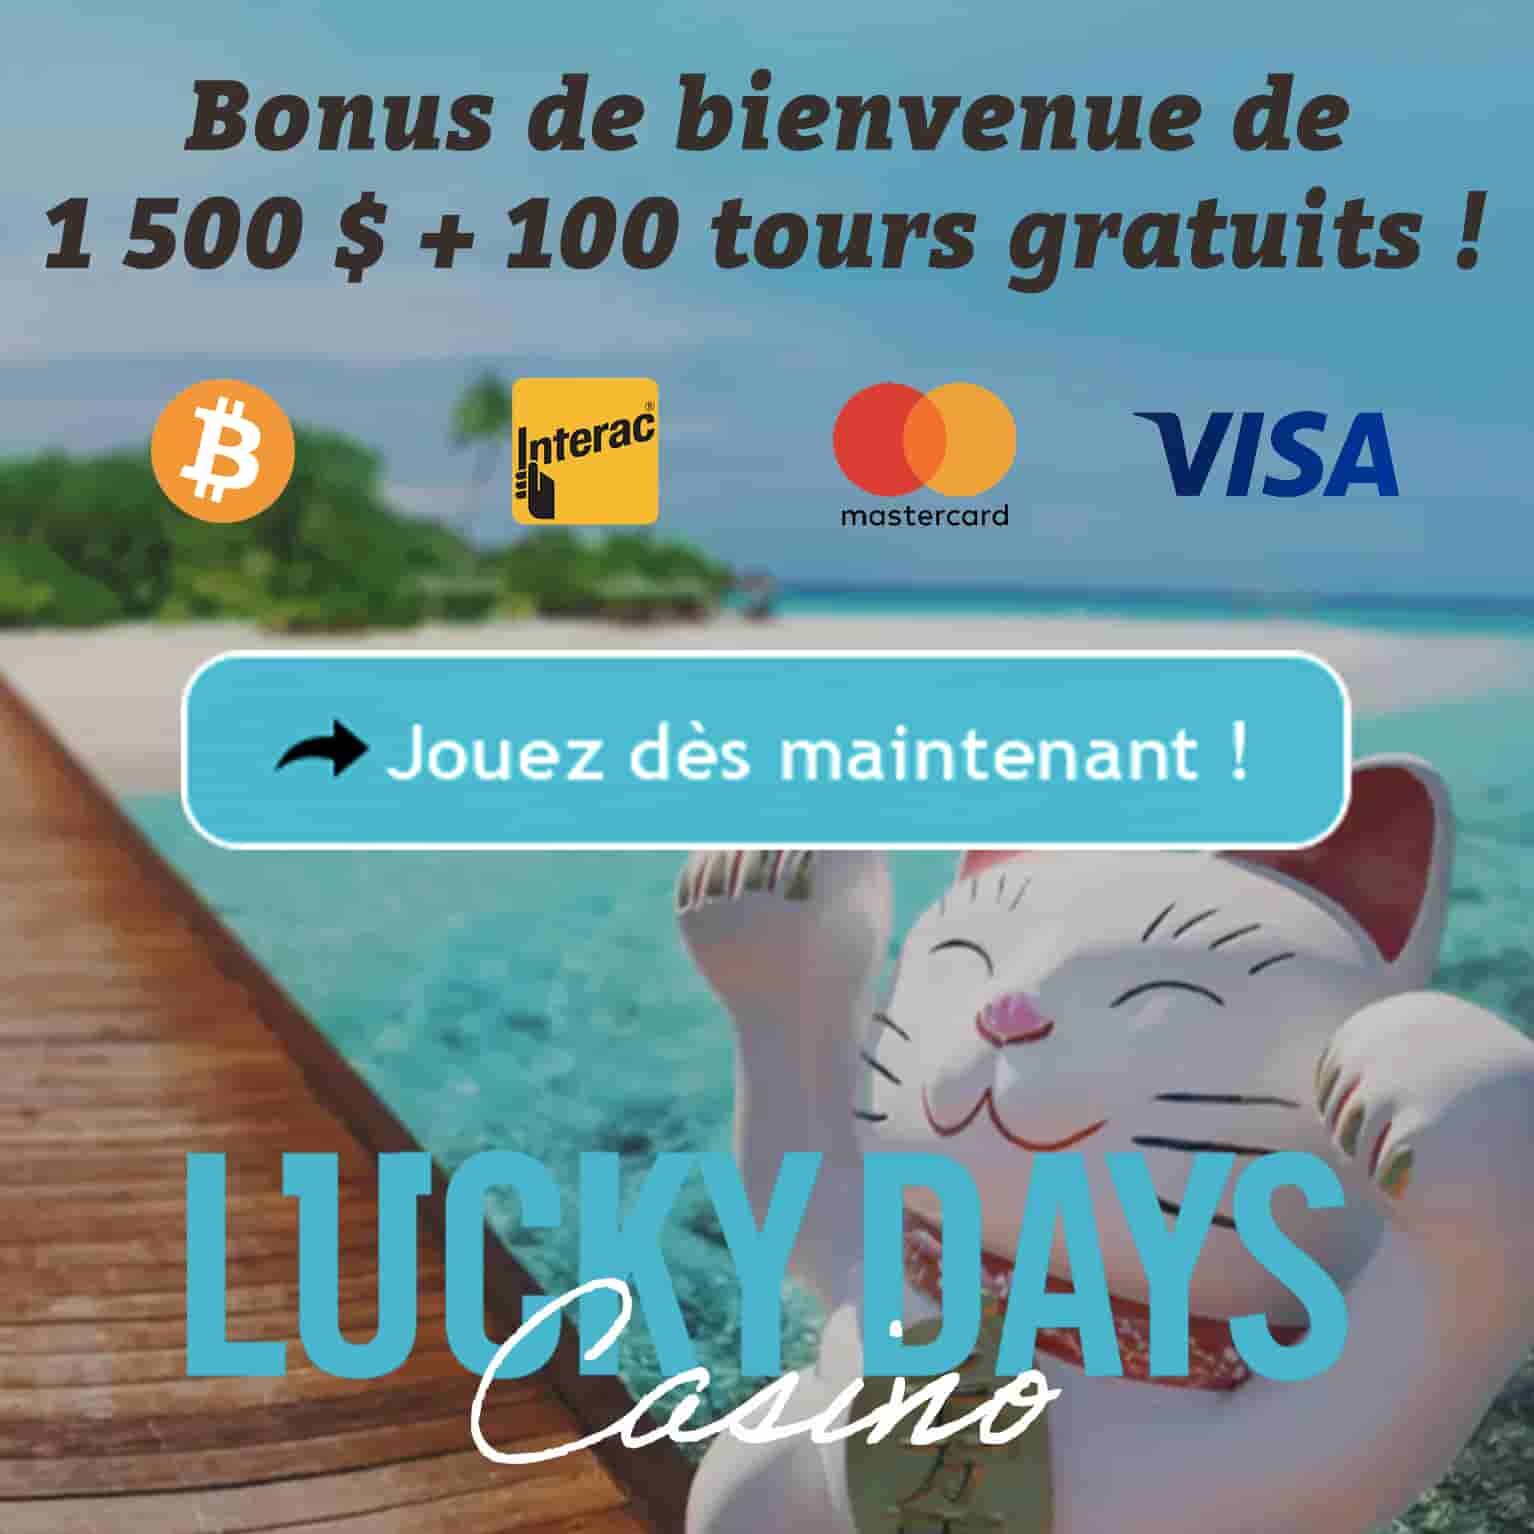 Lucky Days Casino pour Canadiens